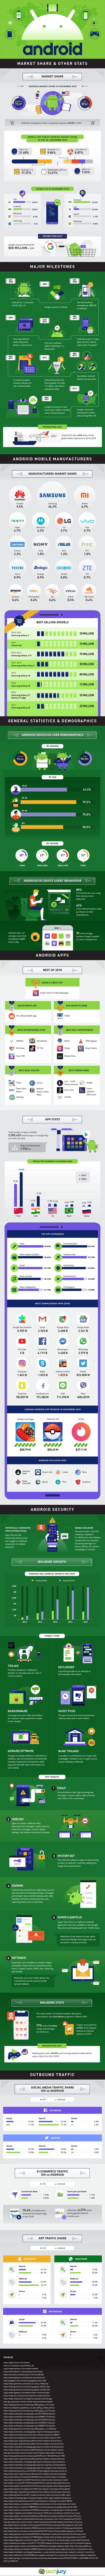 android infographic